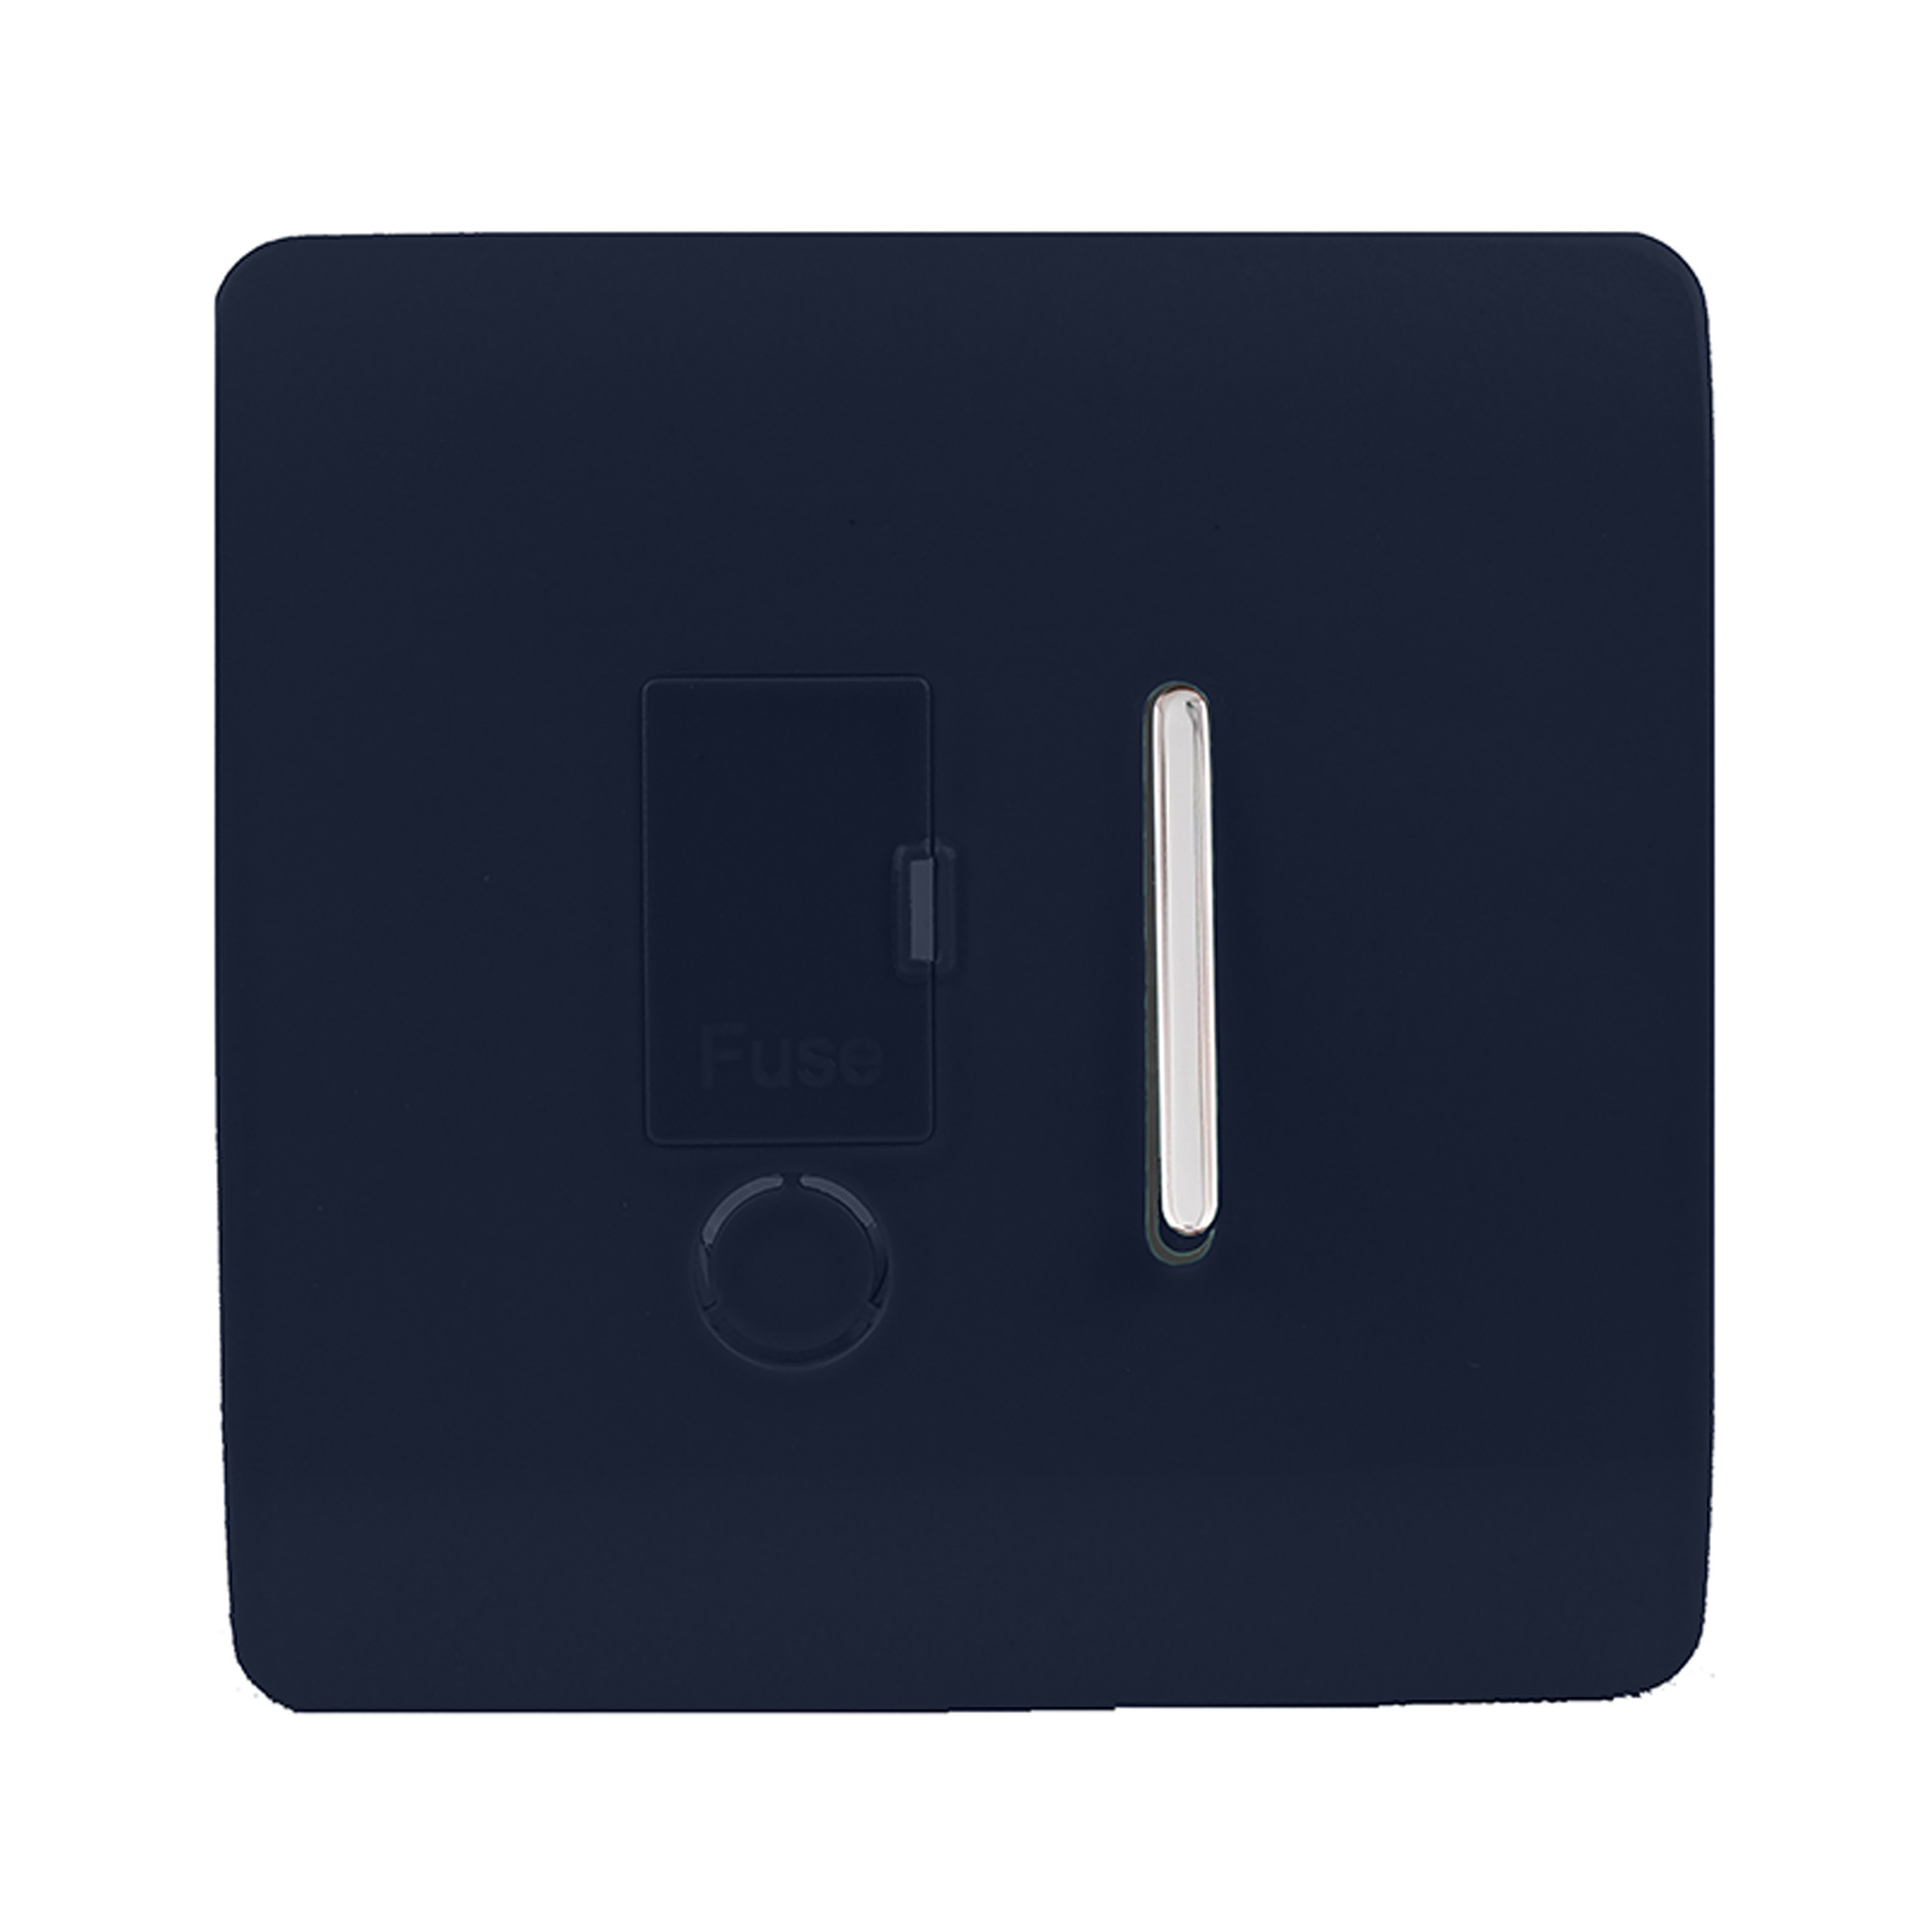 ART-FSNV  Switch Fused Spur 13A With Flex Outlet Navy Blue